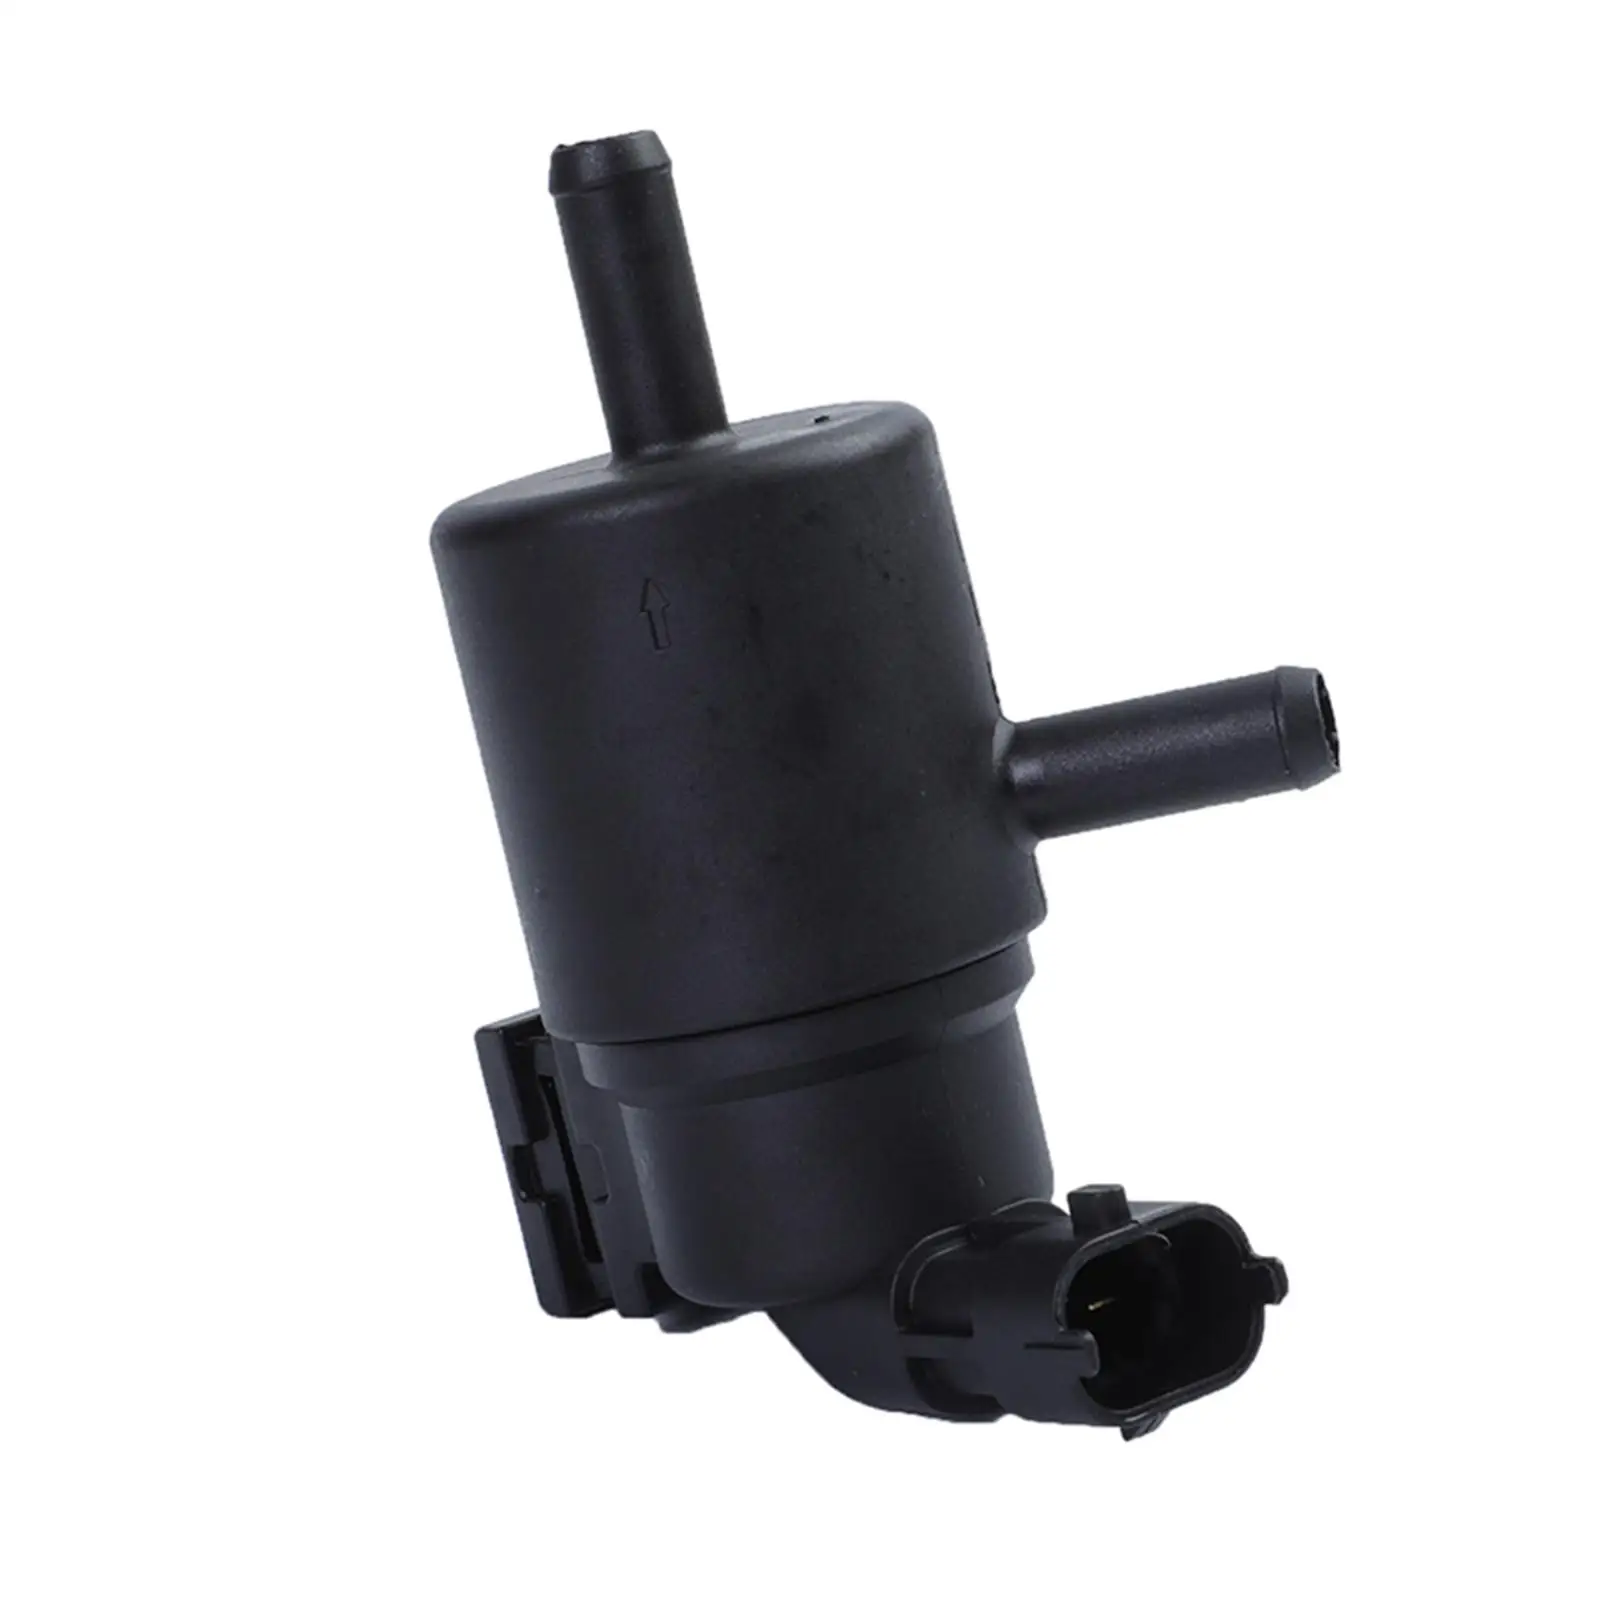 Canister Purge Solenoid Valve 2901003AA0 for Hyundai Vehicle Spare Parts Easily Install